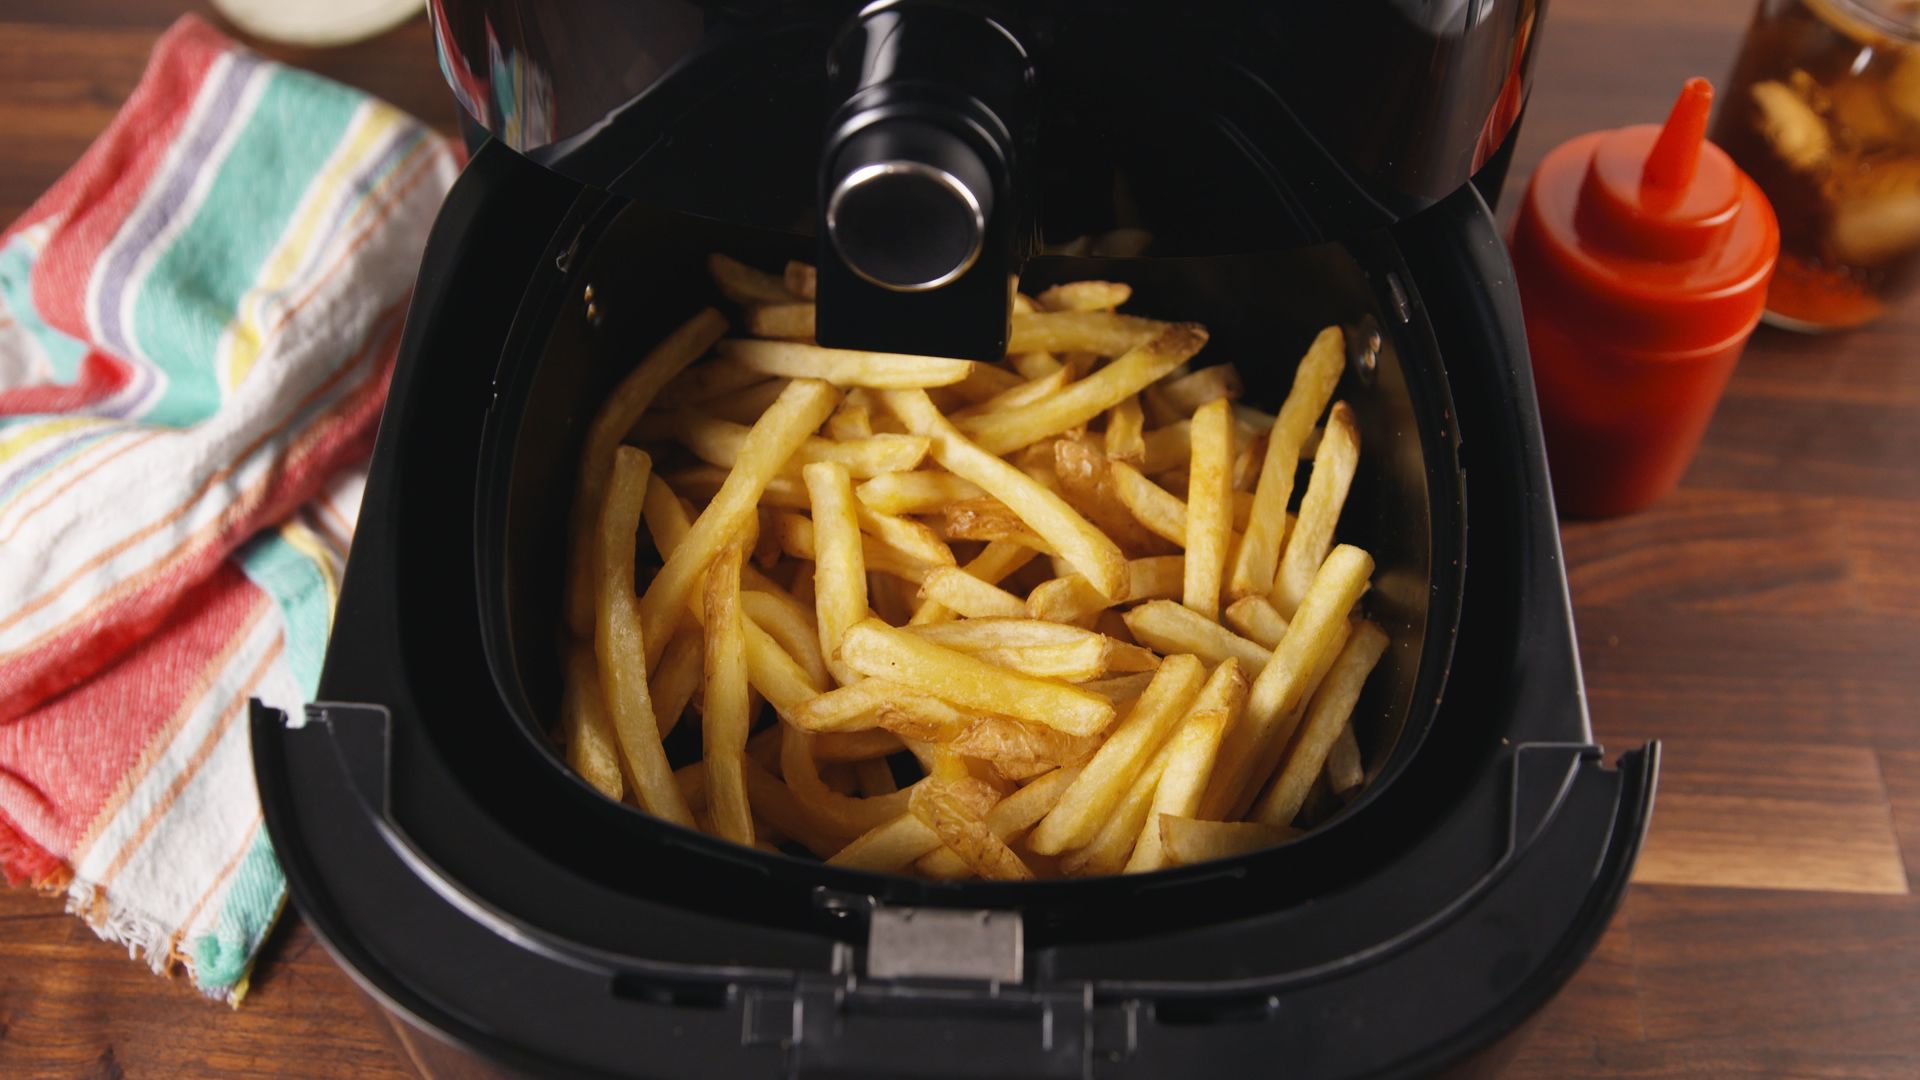 Is your air fryer toxic? Which brand do you use? #airfryer, Airfryer